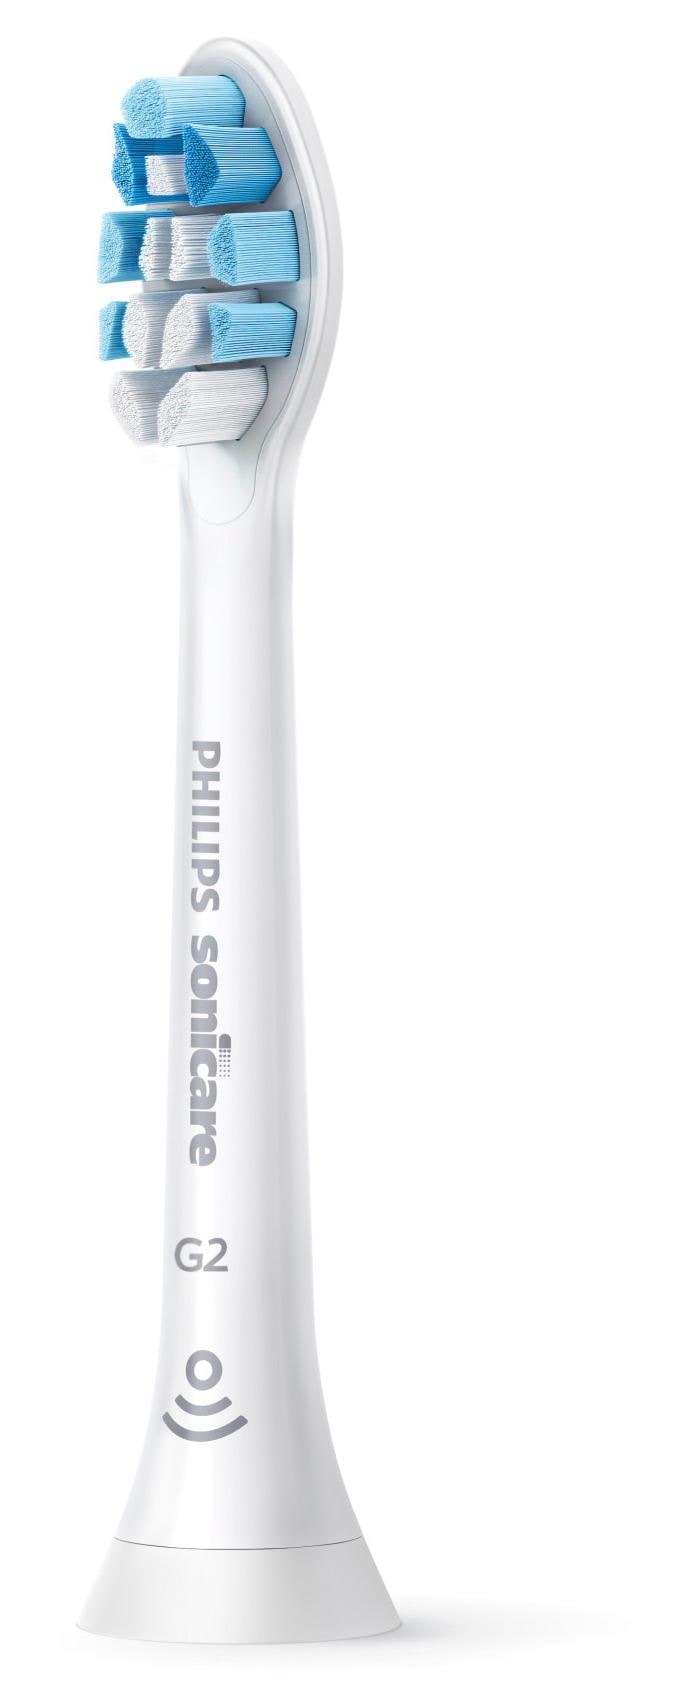 Philips Sonicare - Optimal Plaque Control Replacement Toothbrush Heads (3-pack) - White_1